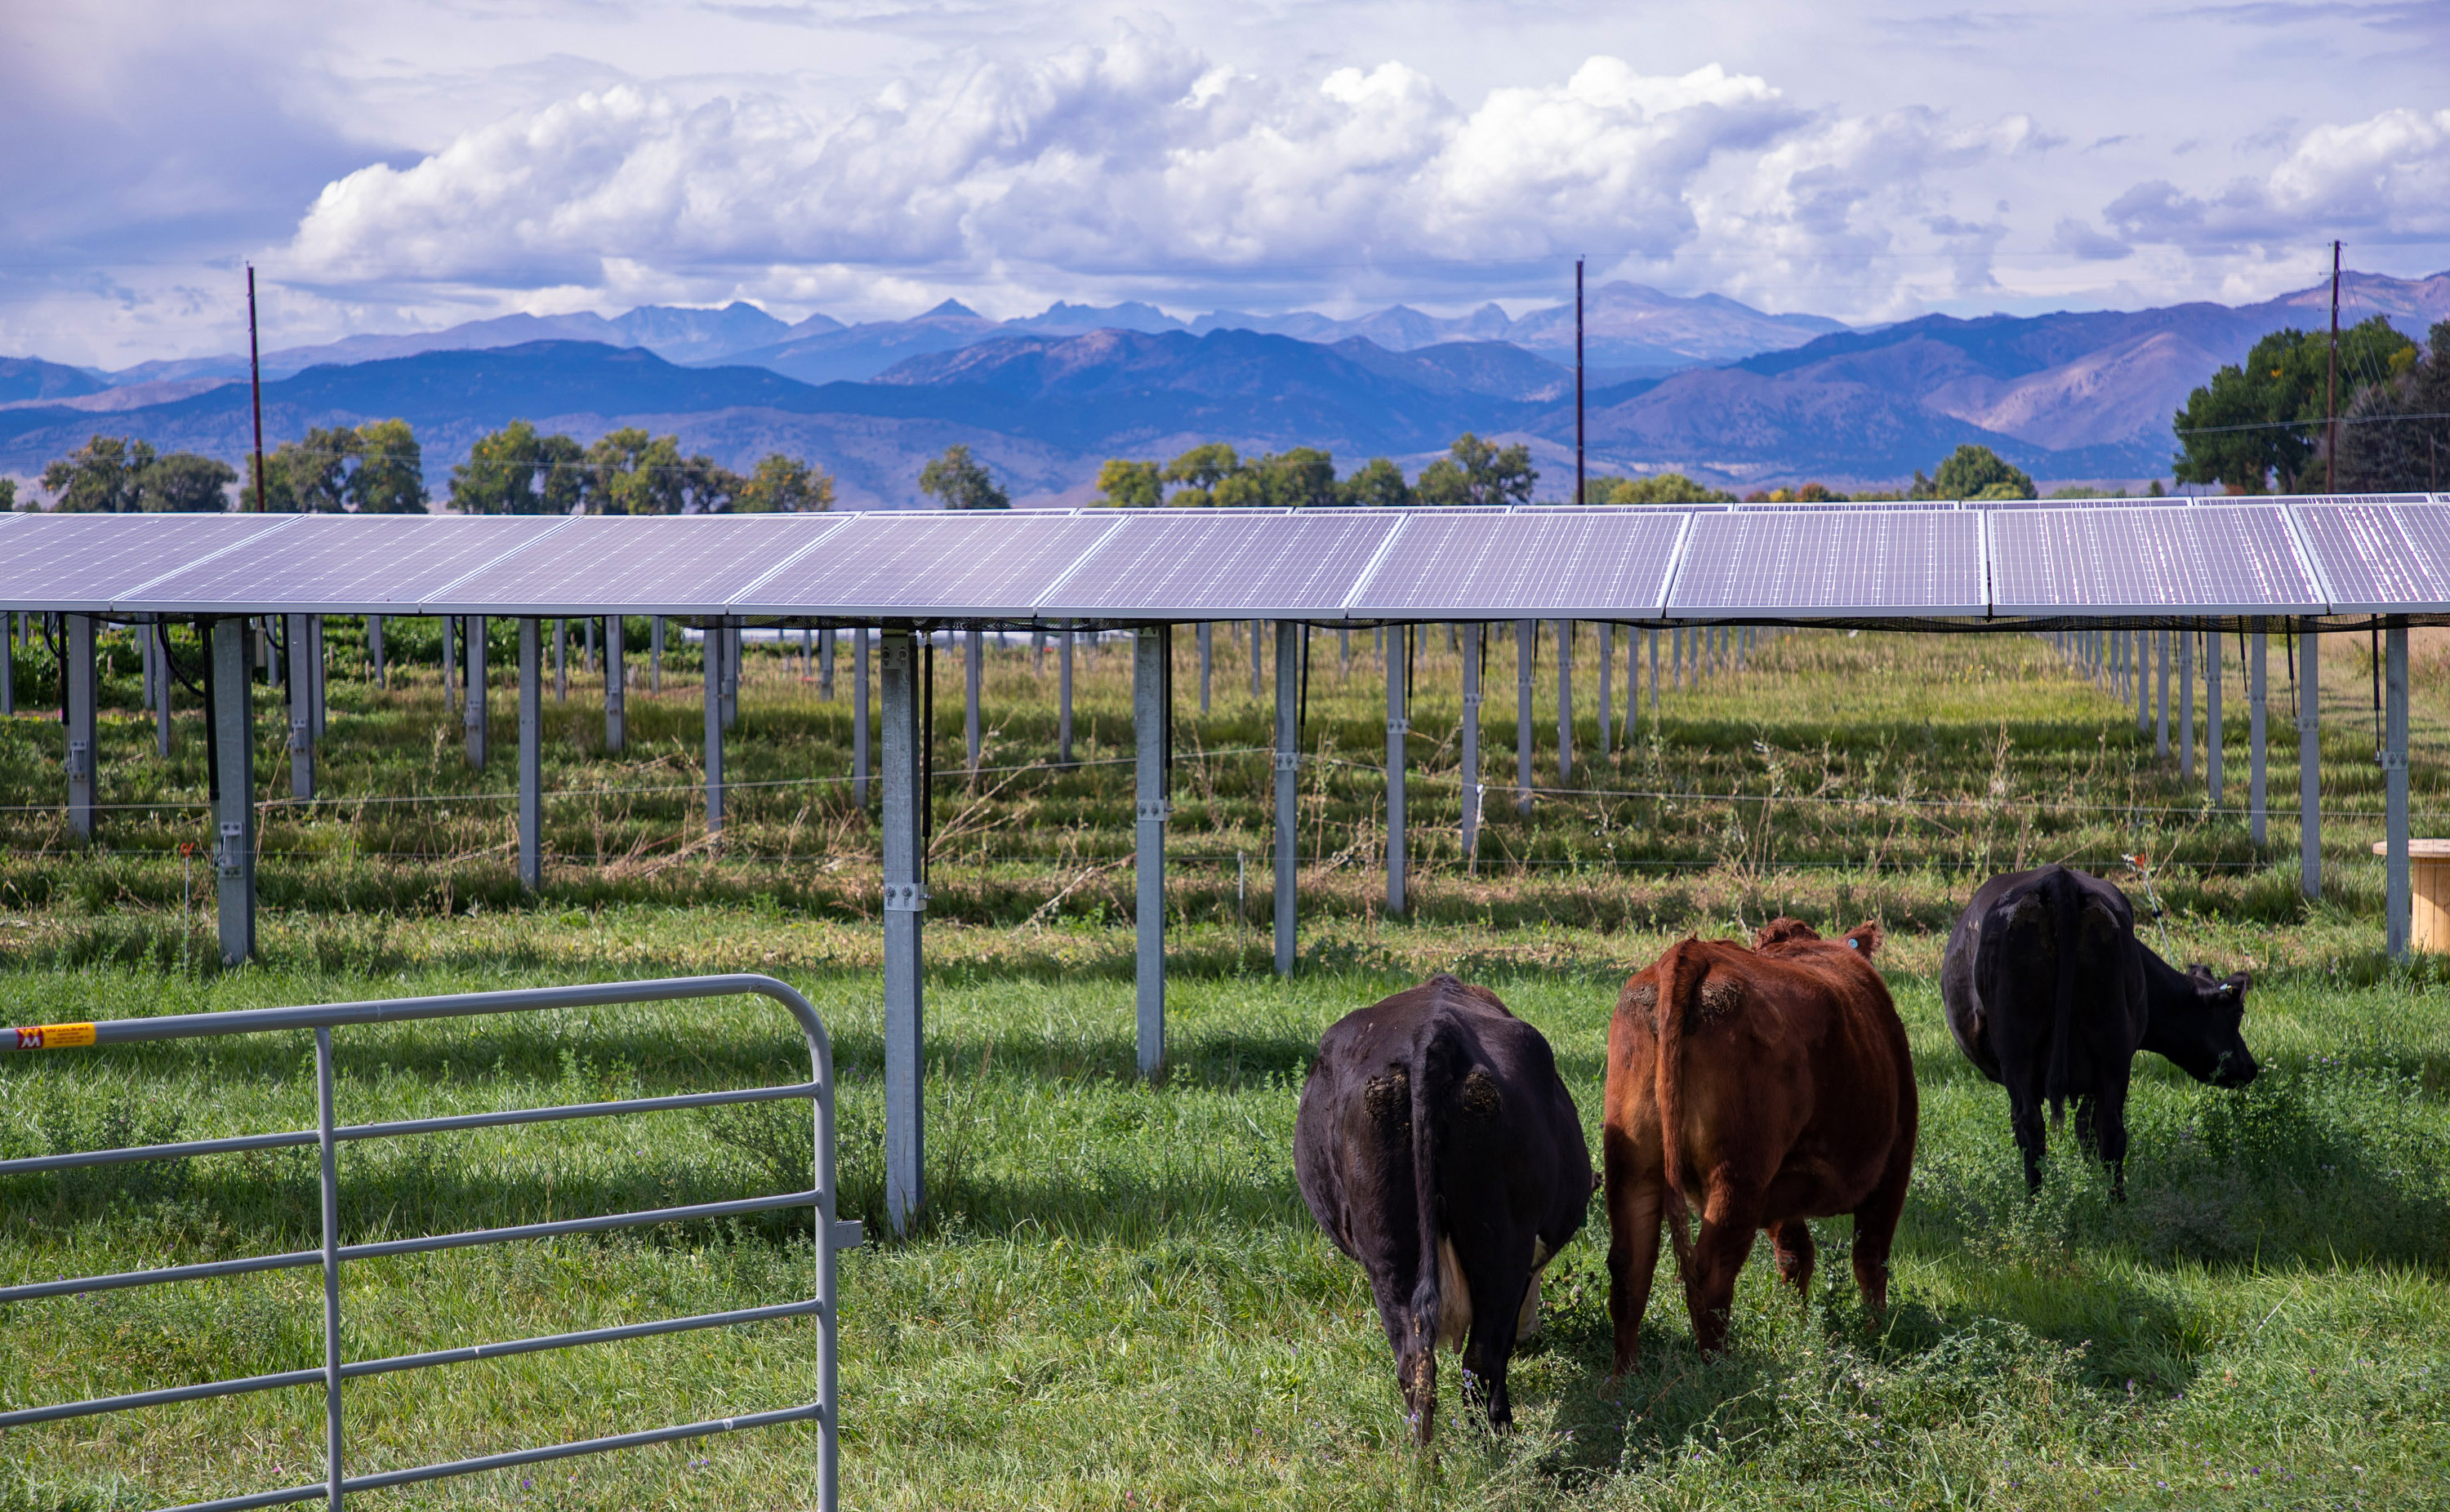 three cows standing next to a row of solar panels